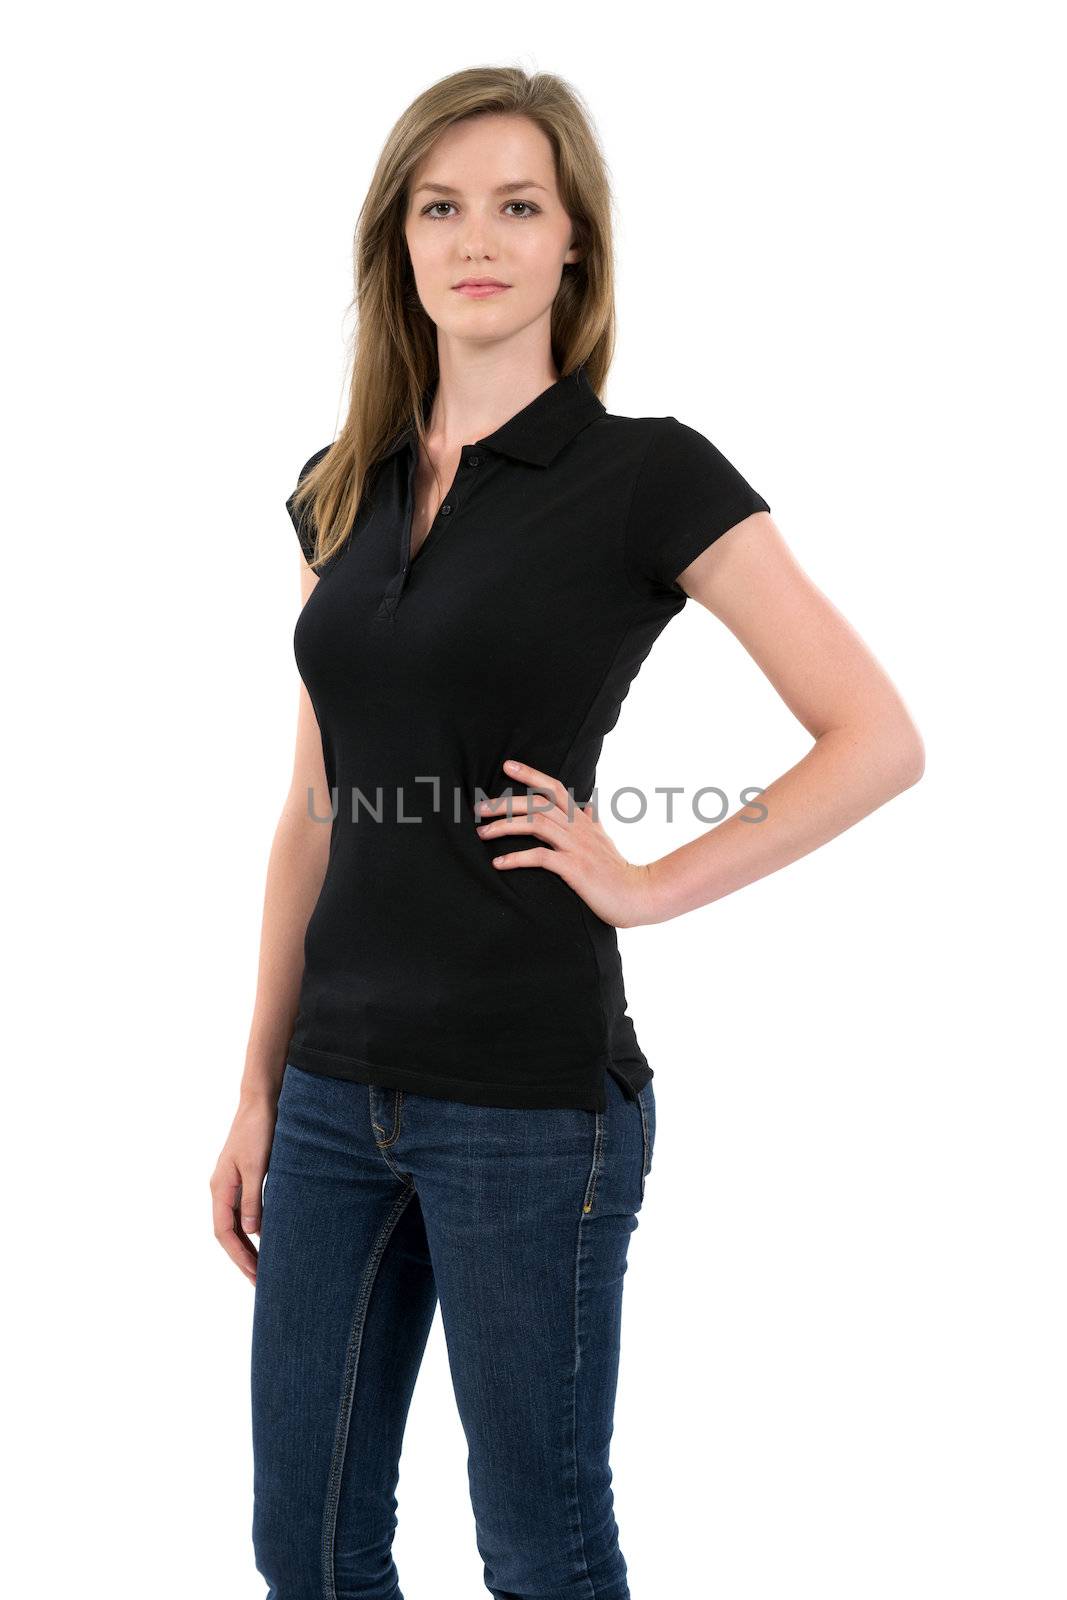 Blond woman modeling blank black polo shirt by sumners